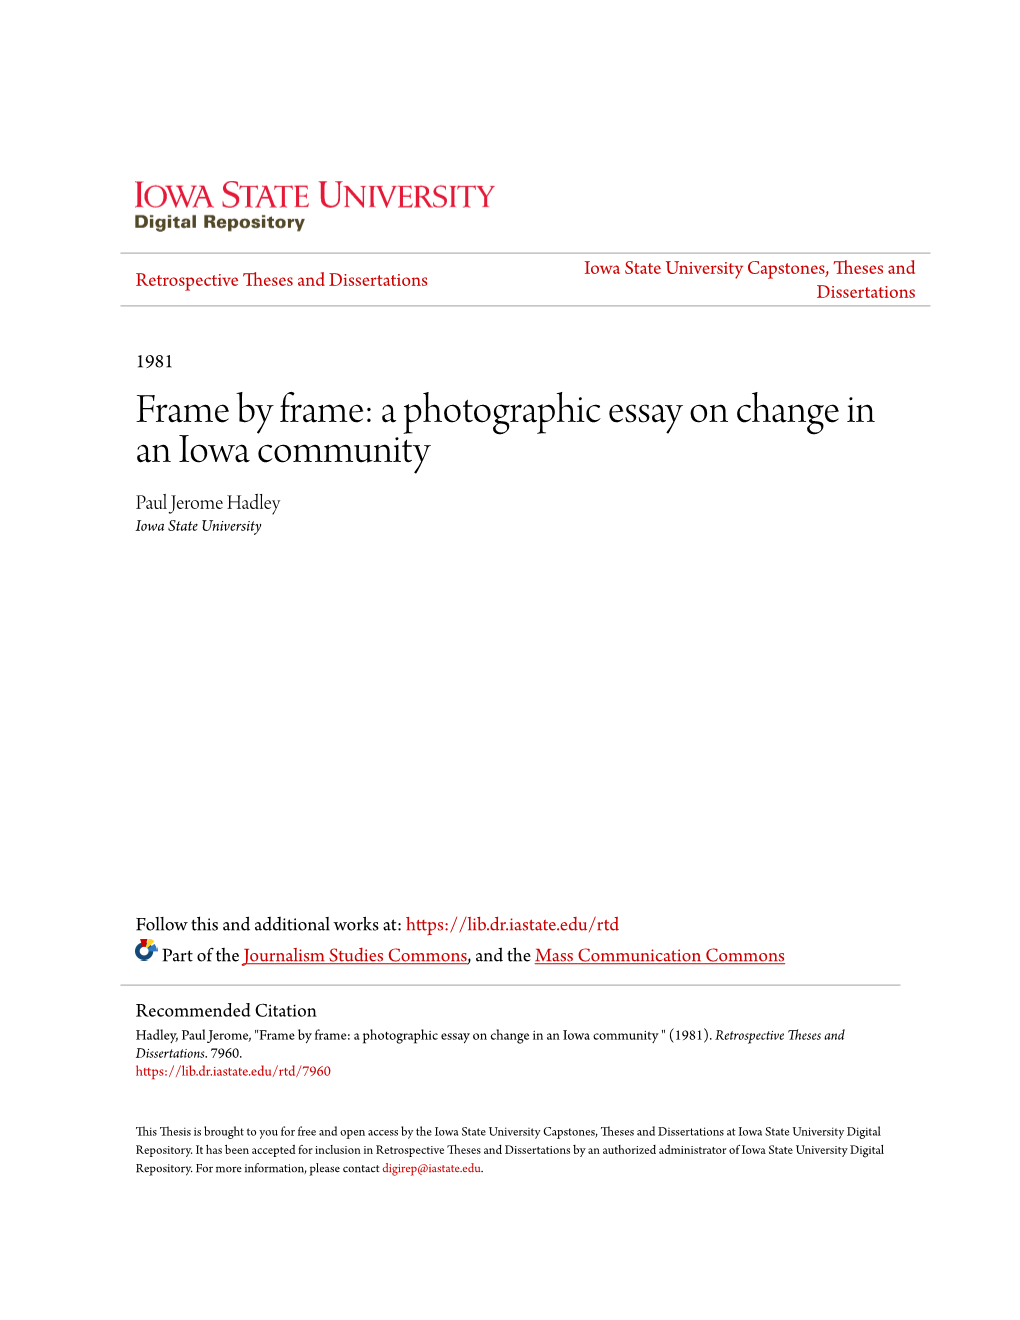 Frame by Frame: a Photographic Essay on Change in an Iowa Community Paul Jerome Hadley Iowa State University